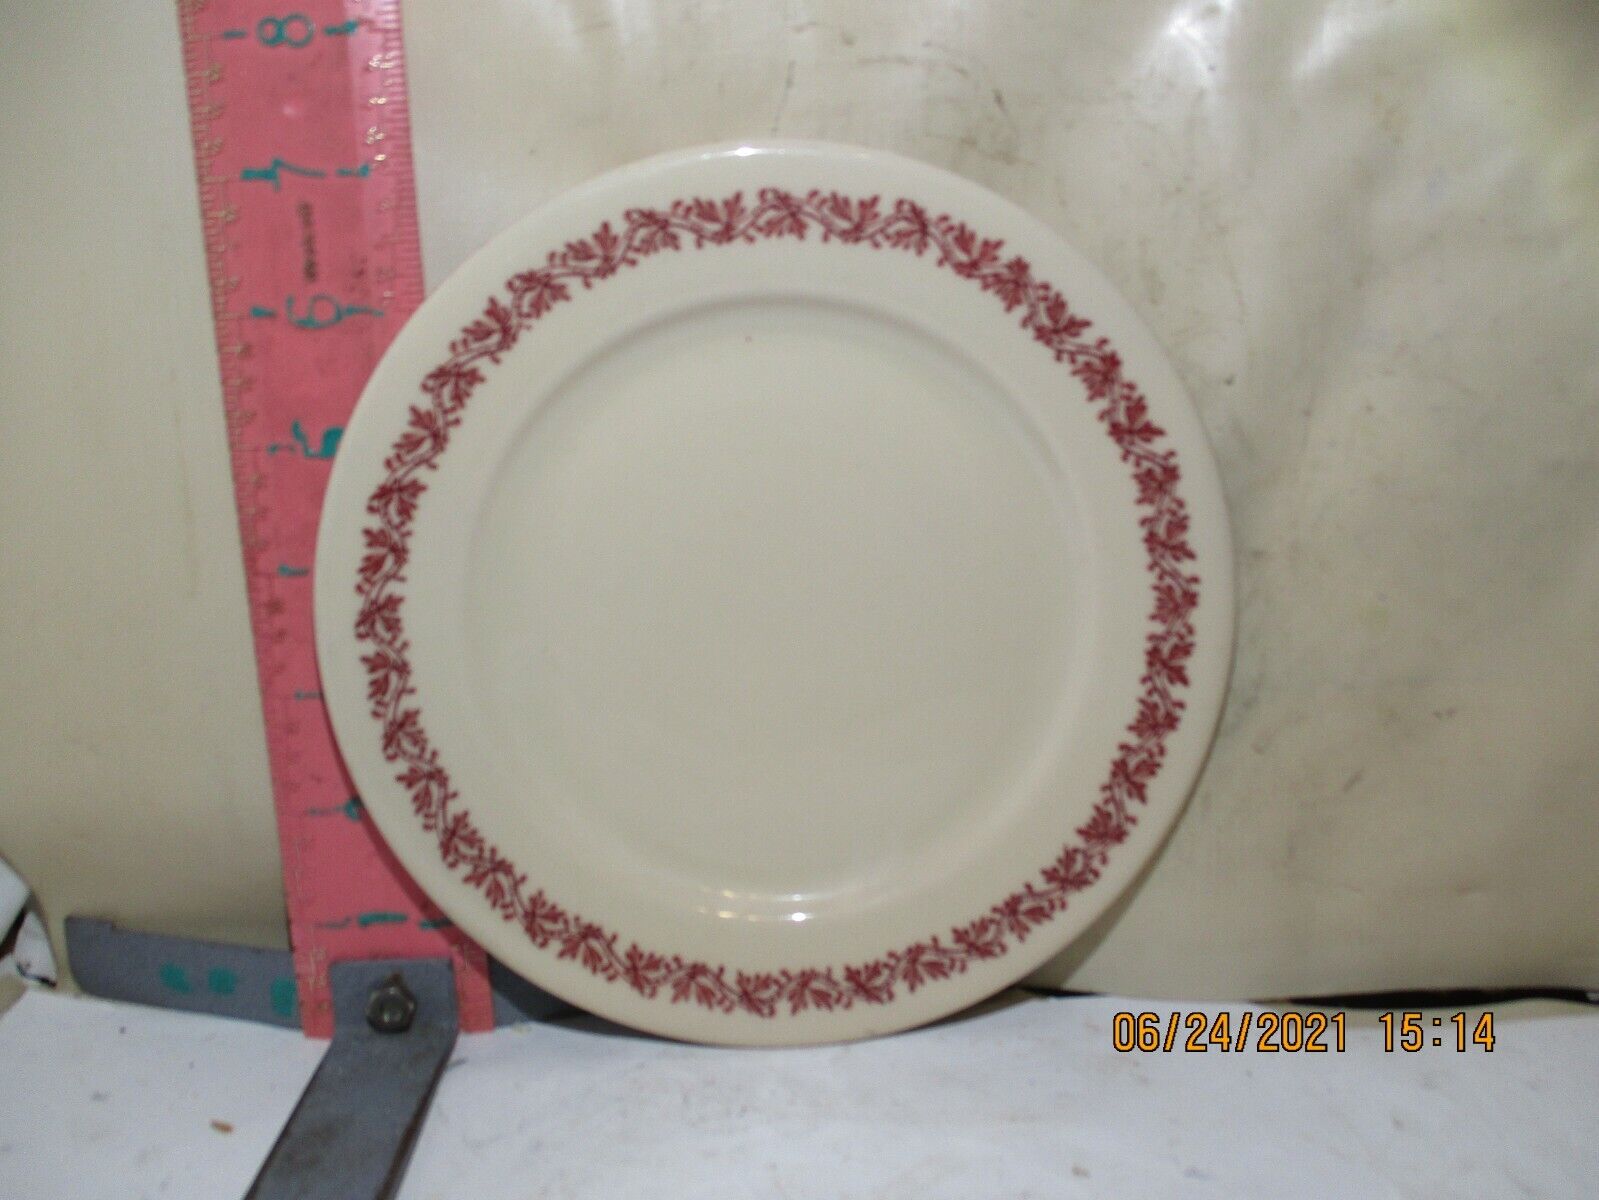 IROQUOIS CHINA RESTAURANT WARE 7 3/8 INCH PLATE - CODE V-9 , 1936 OR 1965